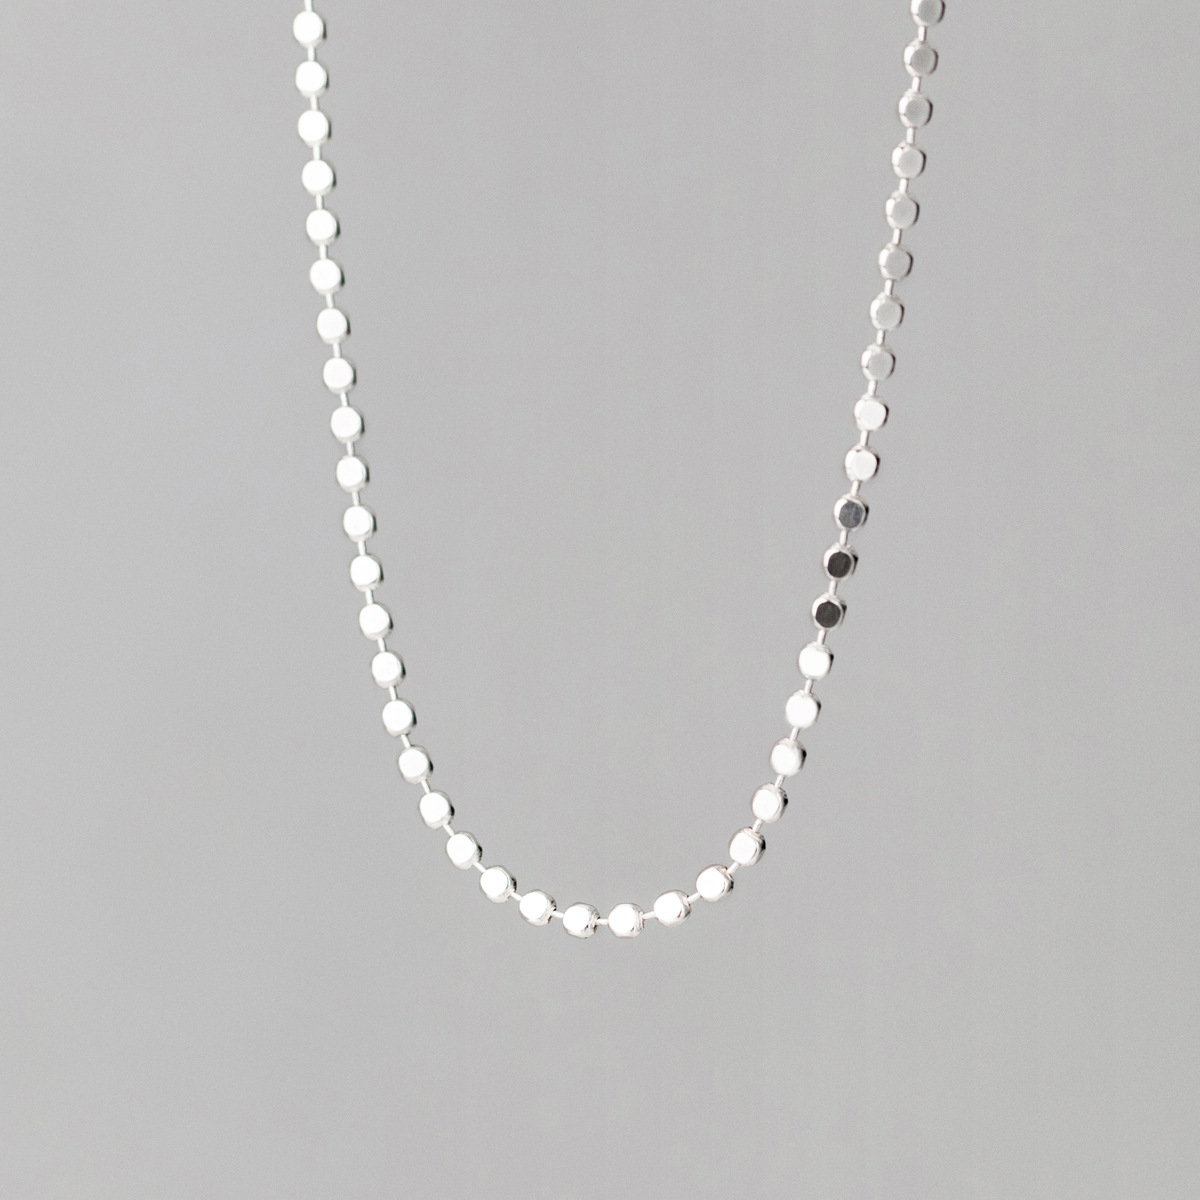 Basic glossy round piece s925 silver necklace-BlingRunway